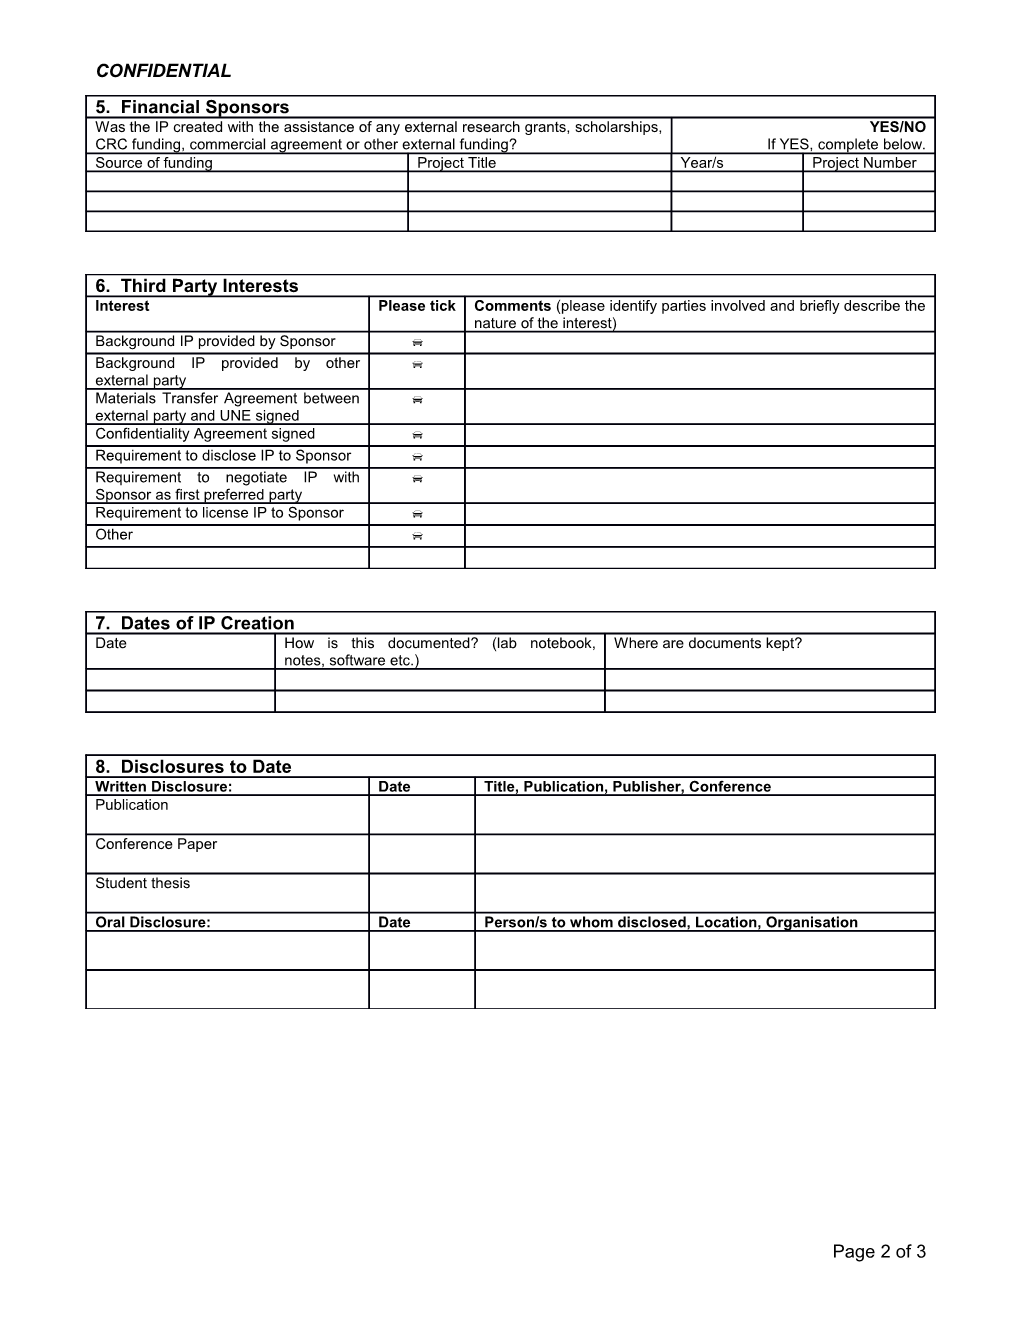 Who Should Use This Form